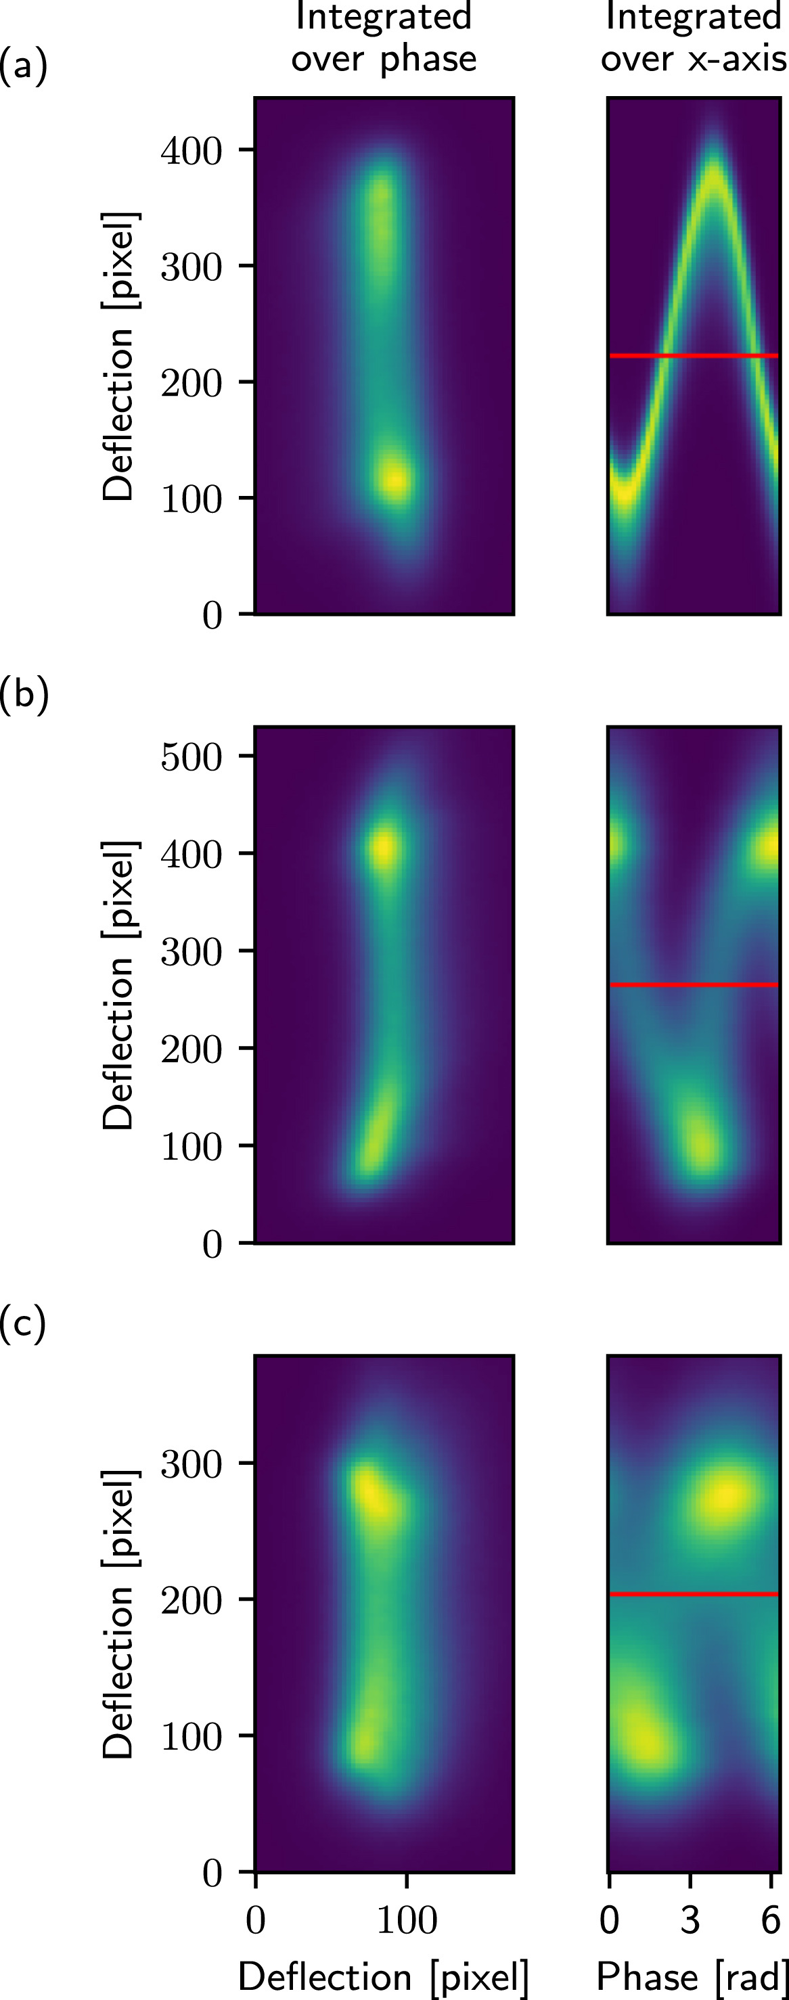 Deflection of the electron beam by a microwave magnetic field is visualized using low angle diffraction. The (x, y, pn) datasets reveal sinusoidal motion for various frequencies: (a) 0.1 GHz, (b) 1.5 GHz and (c) 2.5 GHz. Integration over the different phases and the x-axis are shown in the left and right columns, respectively. The red line marks the position where a linescan was extracted.